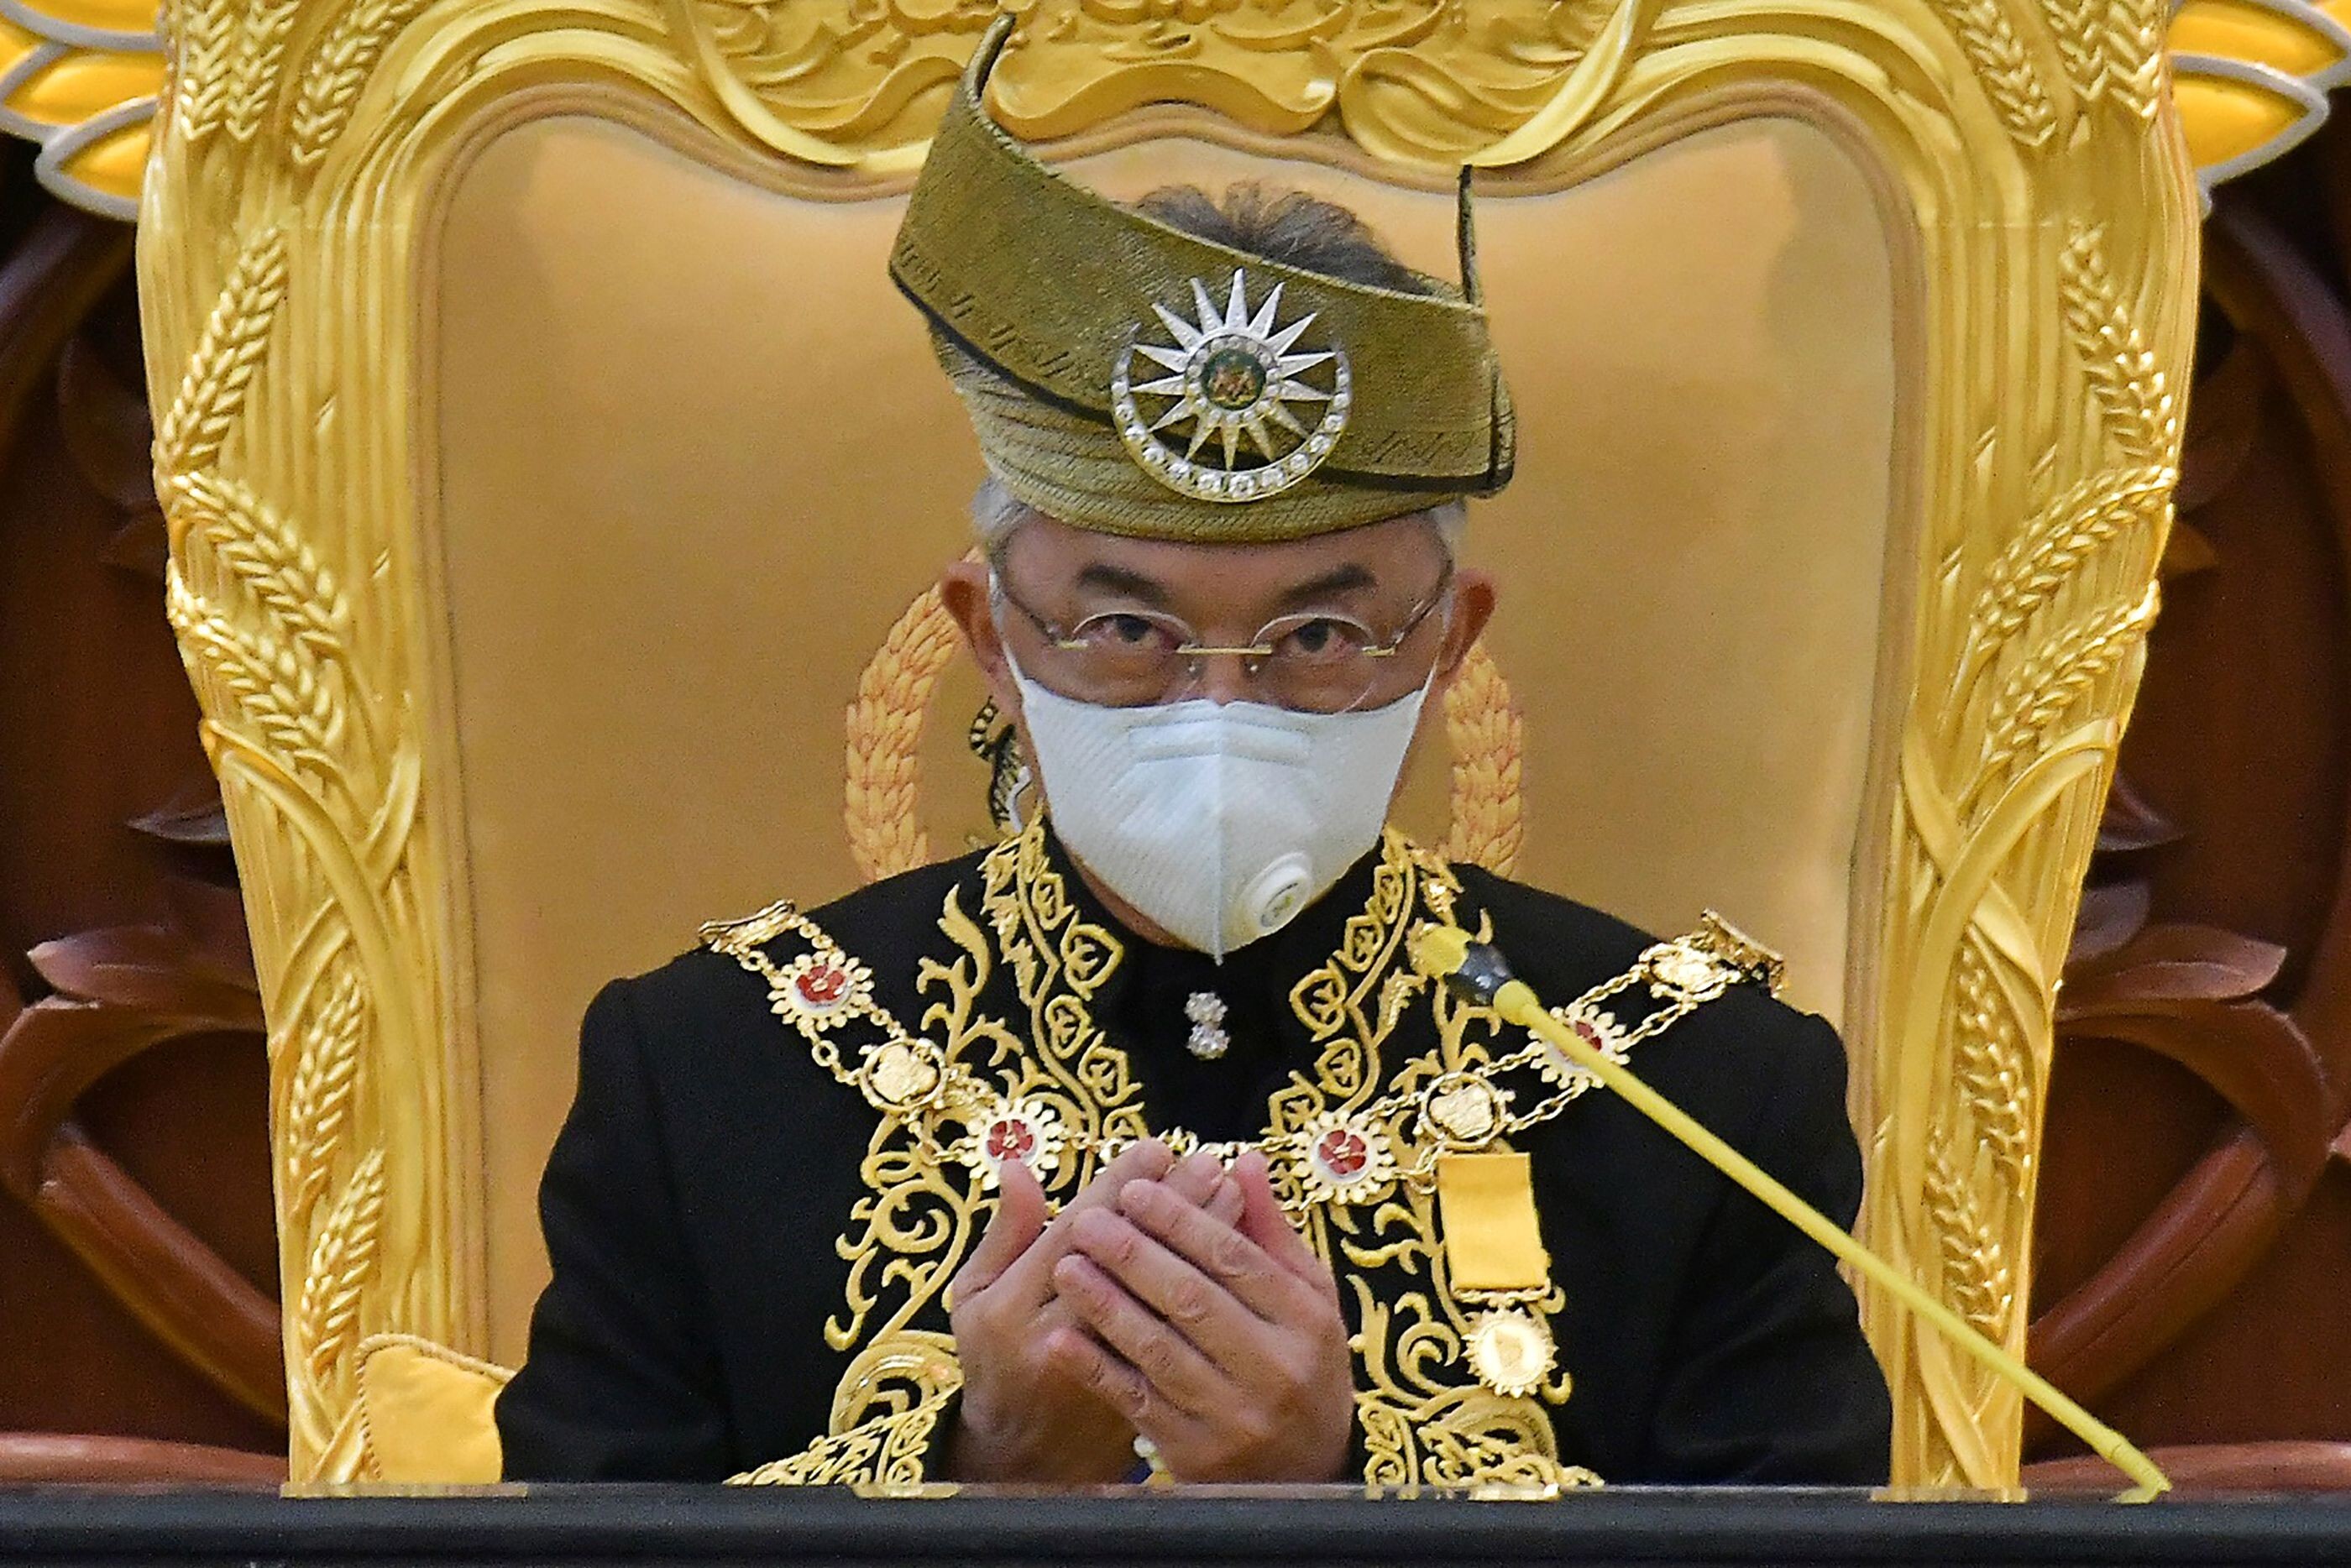 Malaysia's Sultan Abdullah Sultan Ahmad Shah plays a largely ceremonial role as a constitutional monarch but a new movement is calling on him to take steps over the coronavirus pandemic or change the government. Photo: AFP